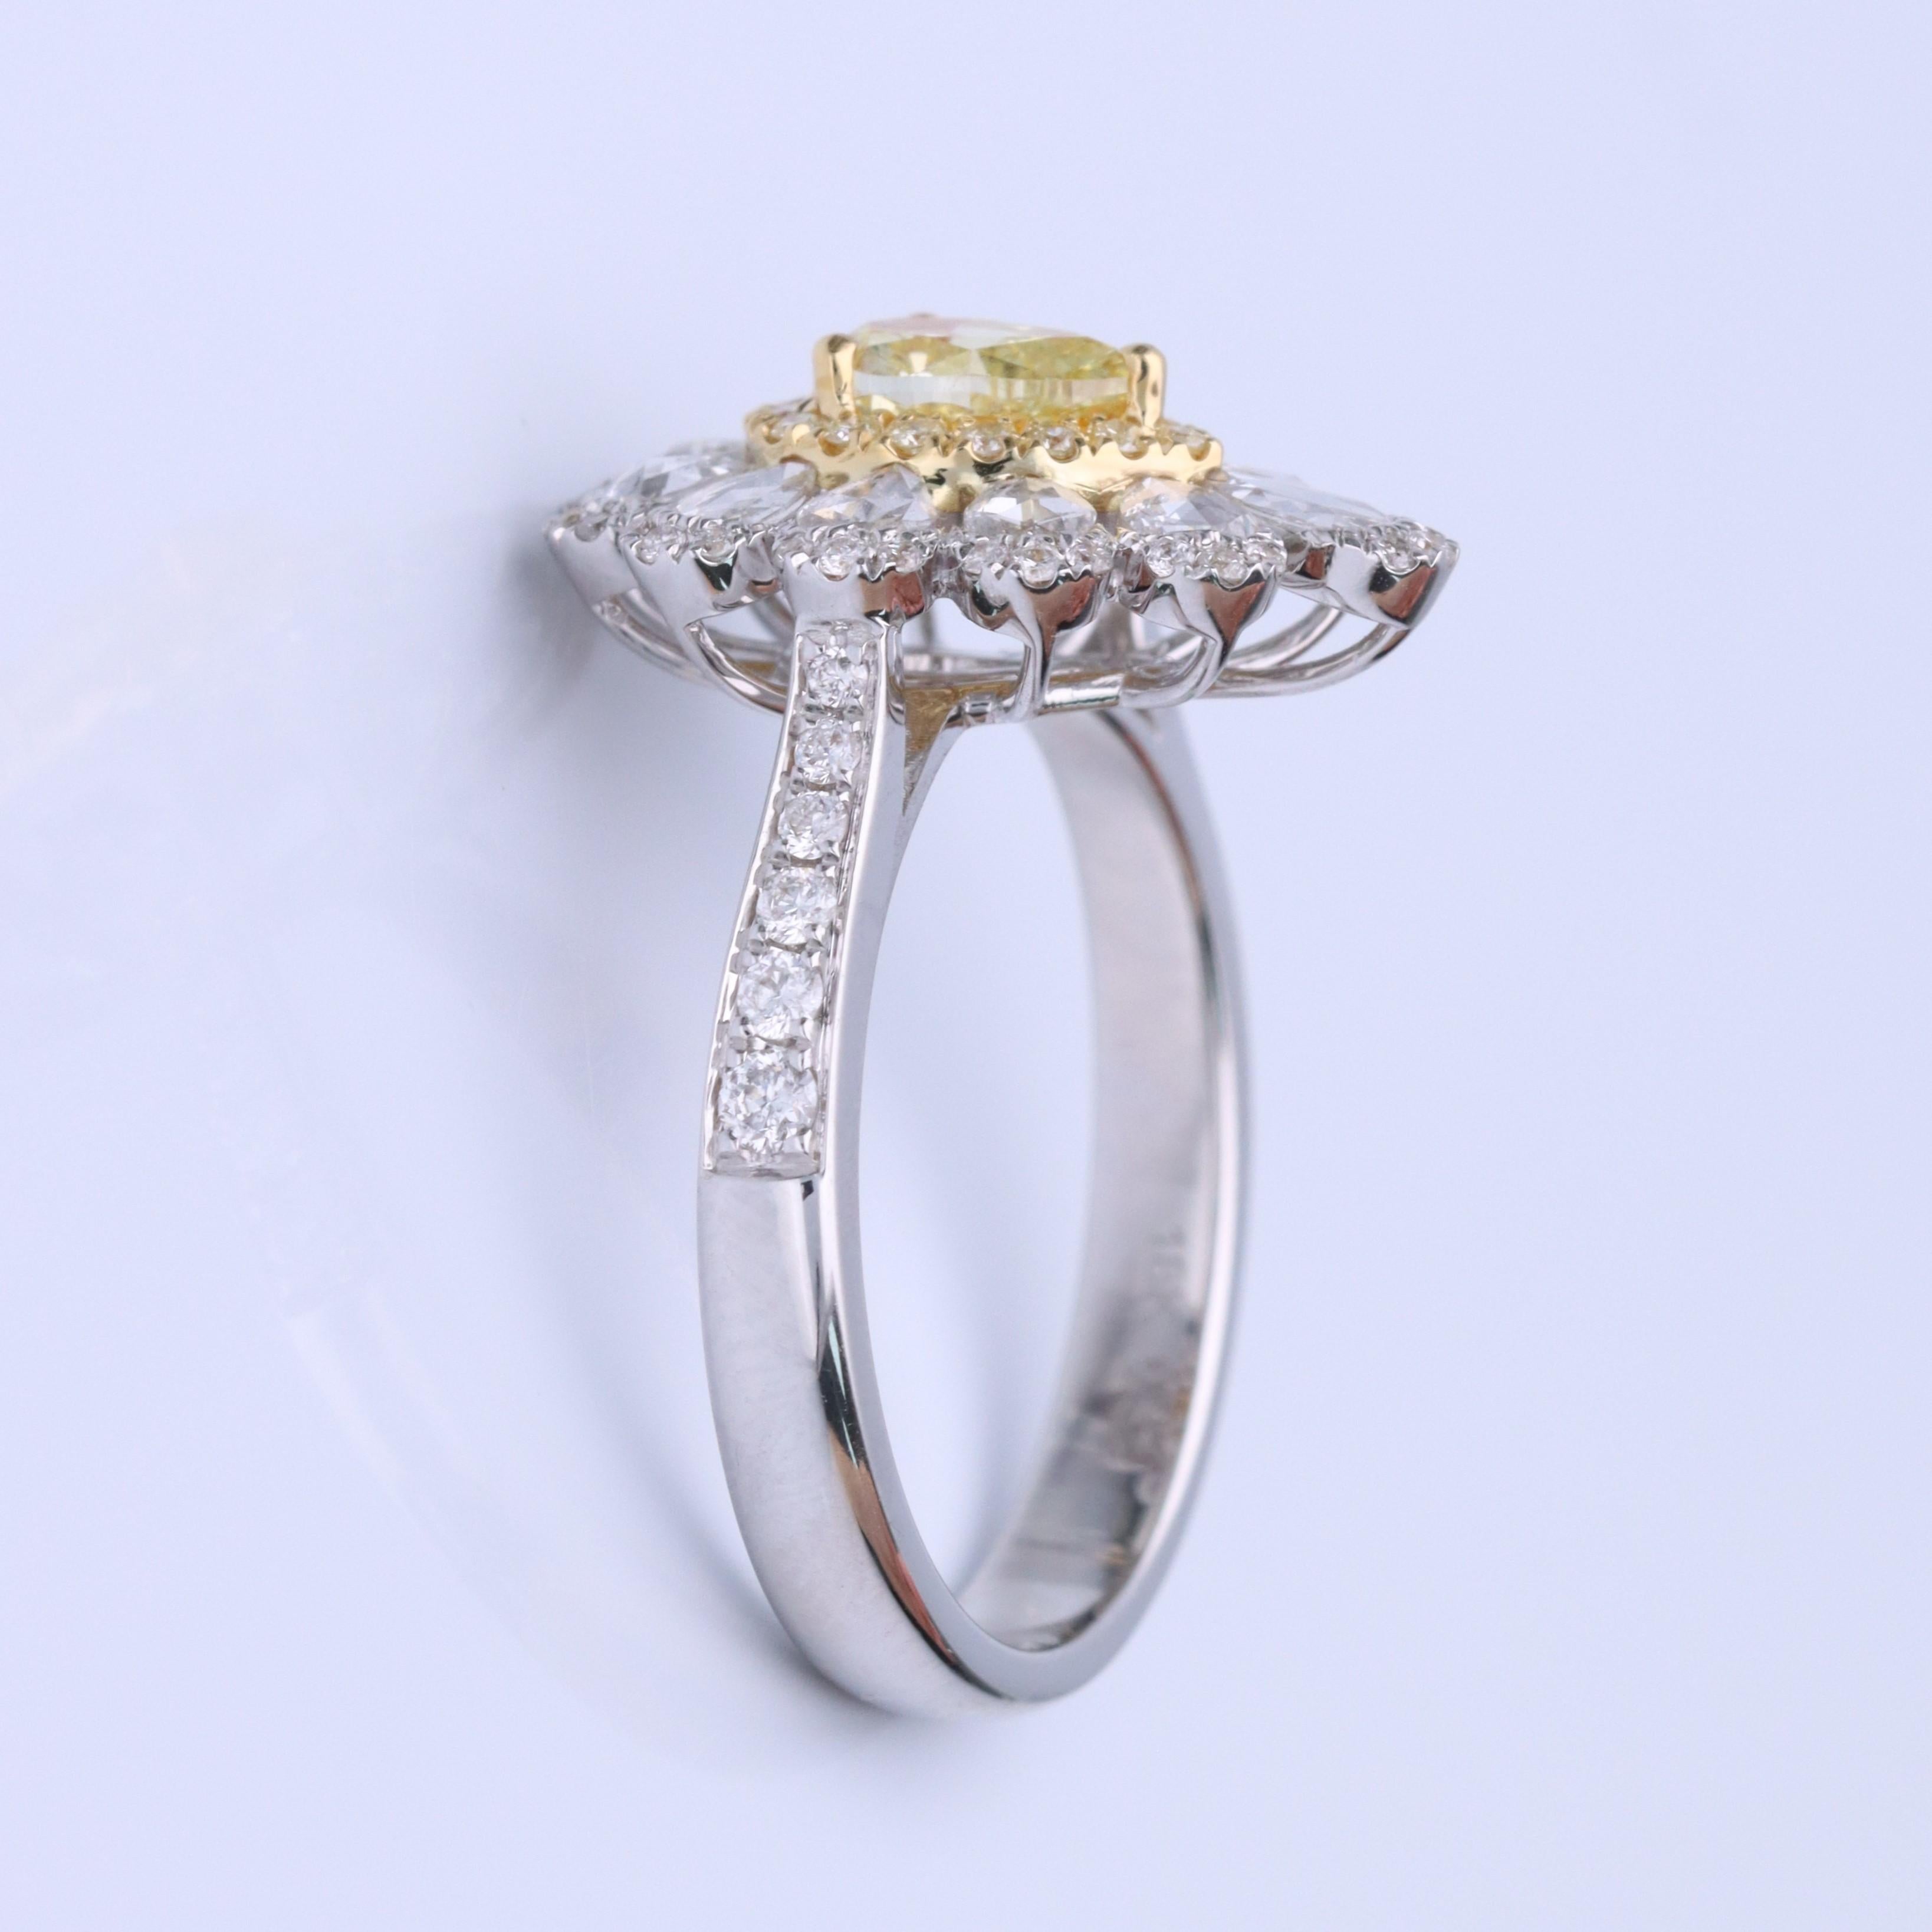 Stunning, timeless, and classy eternity Unique Ring. Decorate yourself in luxury with this Gin & Grace Ring. The 18K Two Tone Gold jewelry boasts Pear-cut 1 pcs  0.52 carat, Round-cut 17 pcs 0.10 carat Yellow Diamond and Natural Round-cut white